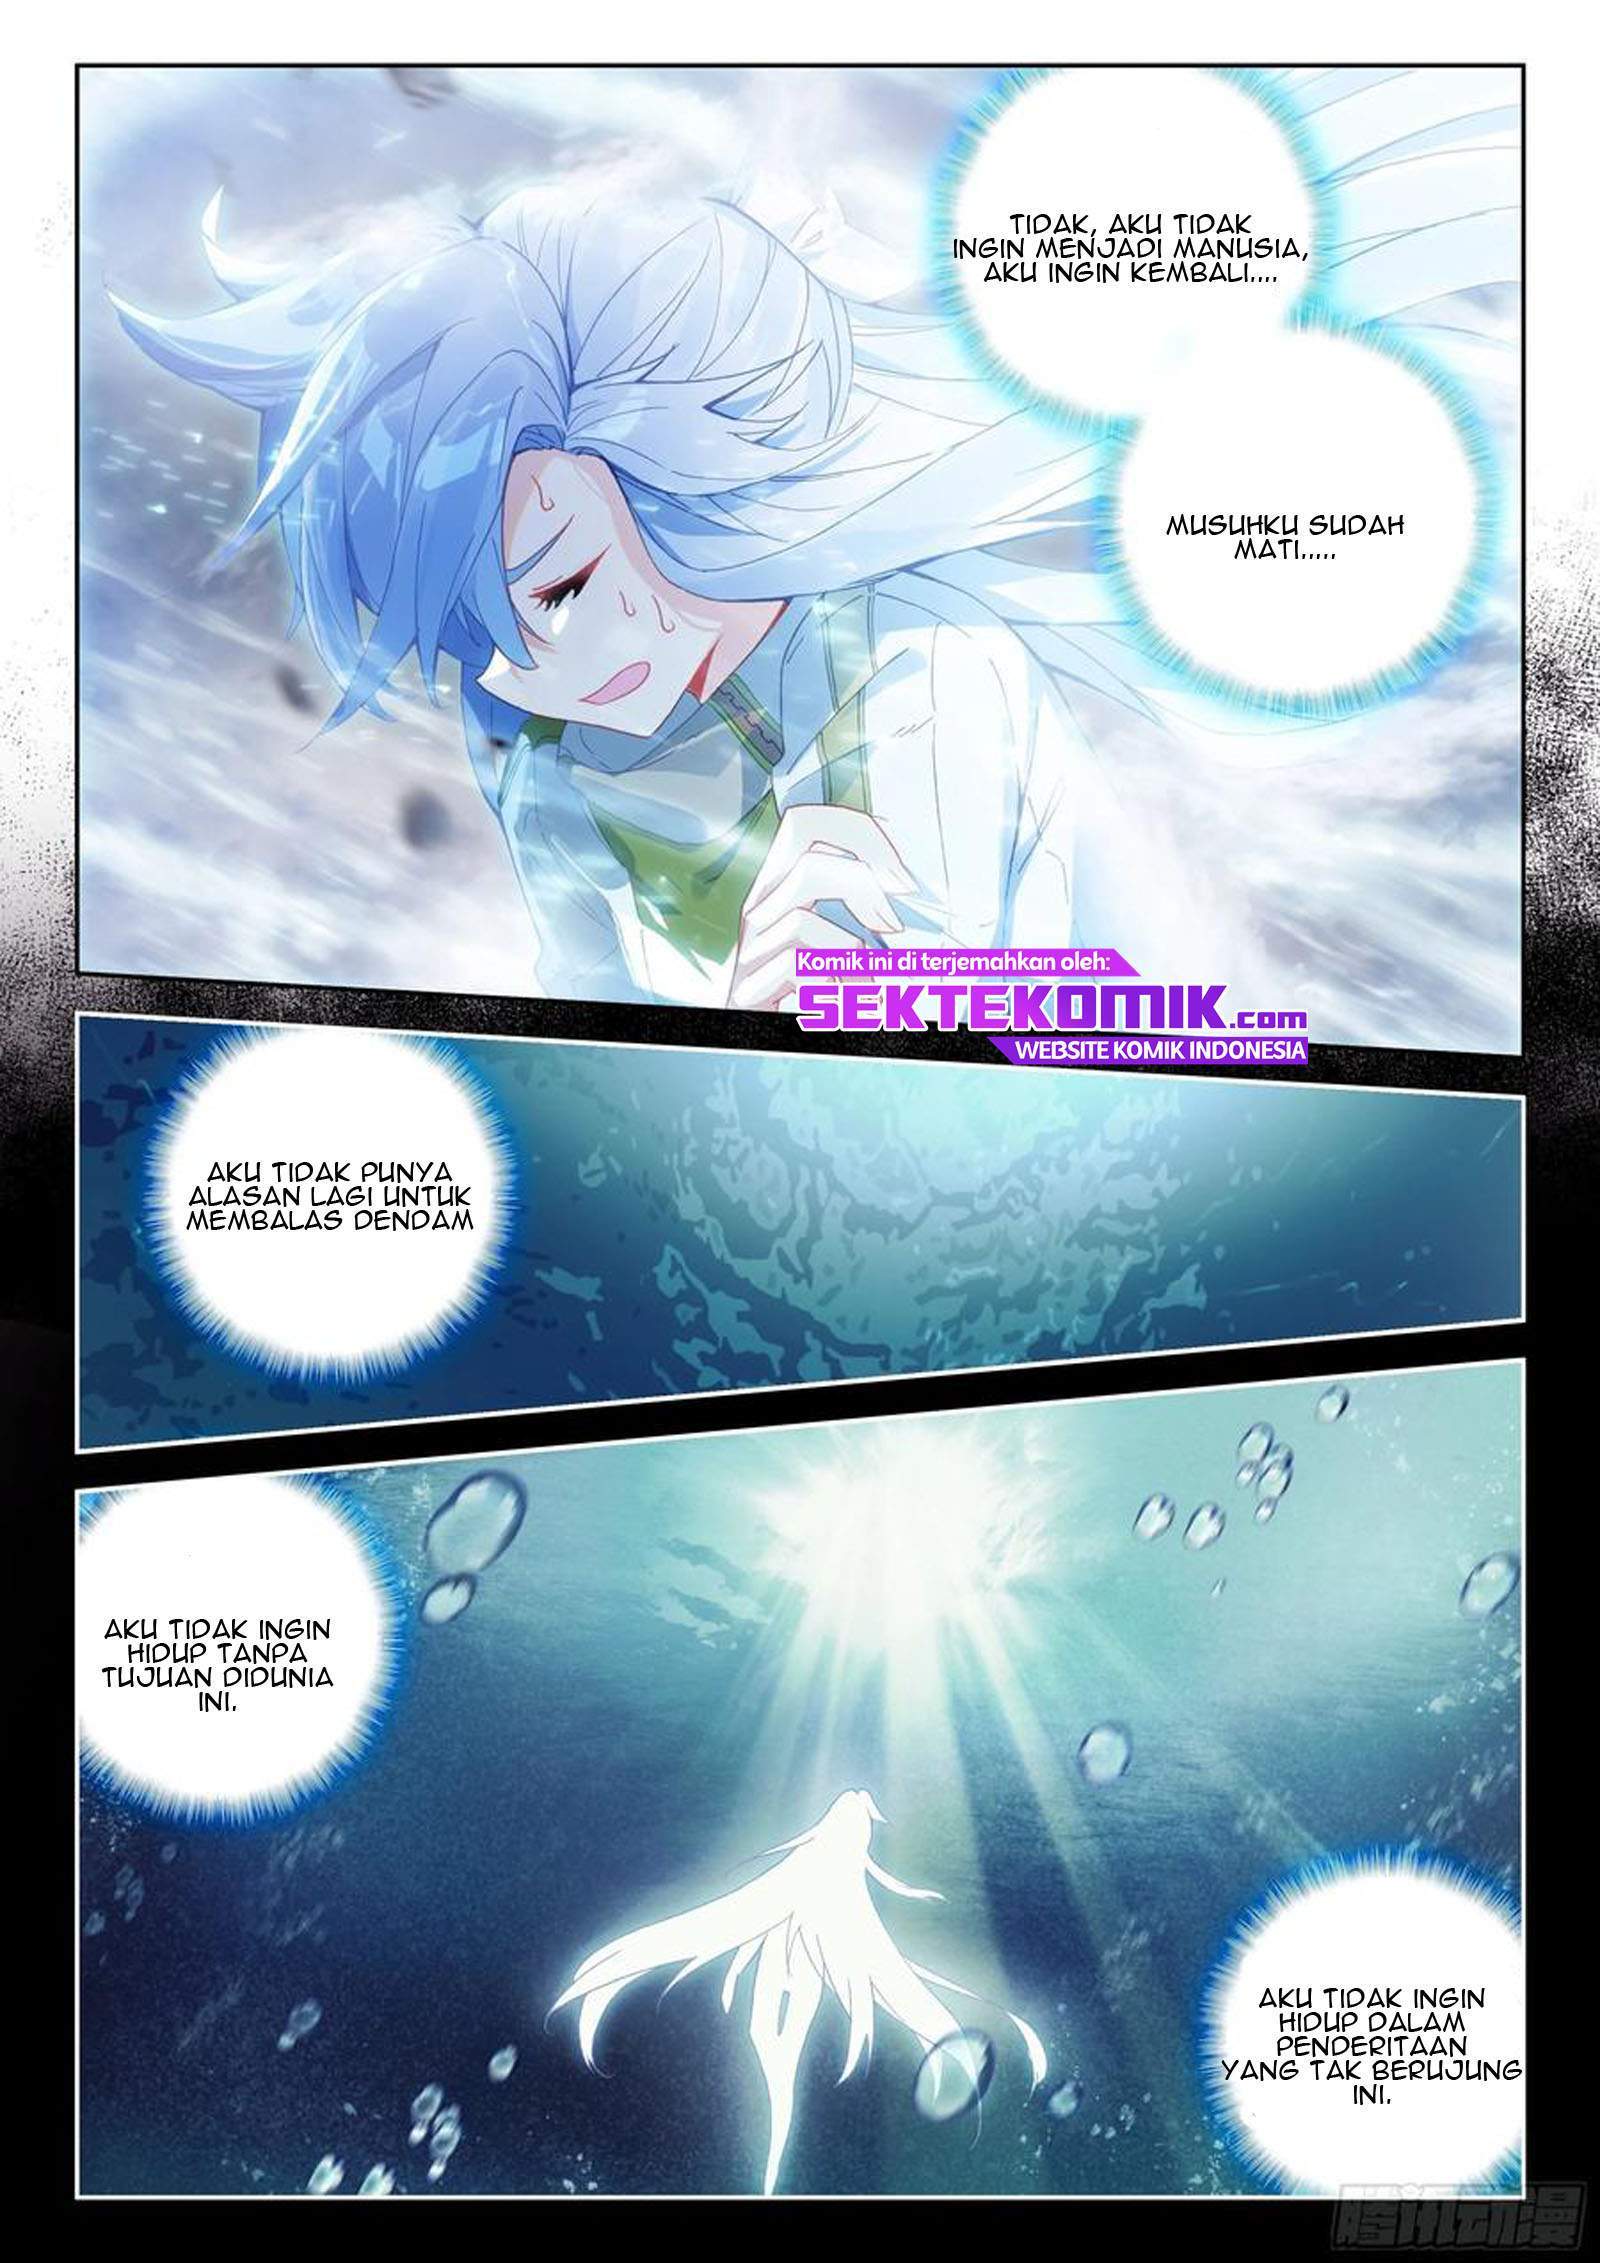 Soul Land IV – The Ultimate Combats Chapter 180